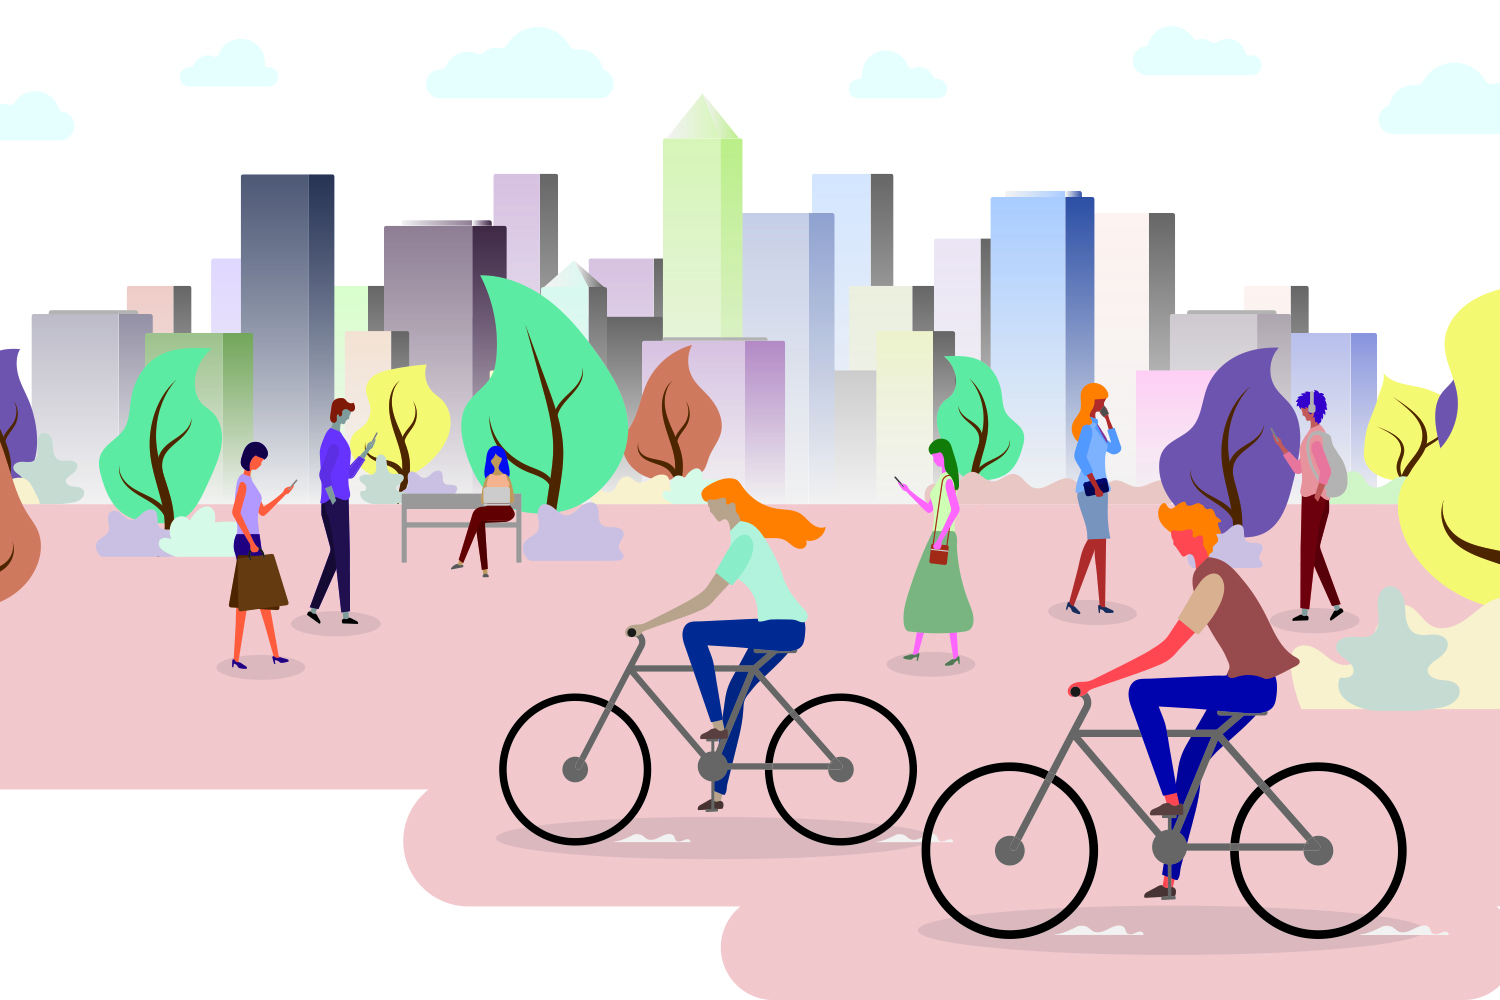 Simple graphic of people walking through a park in an unnamed city, some using bicycles and others using mobile phones